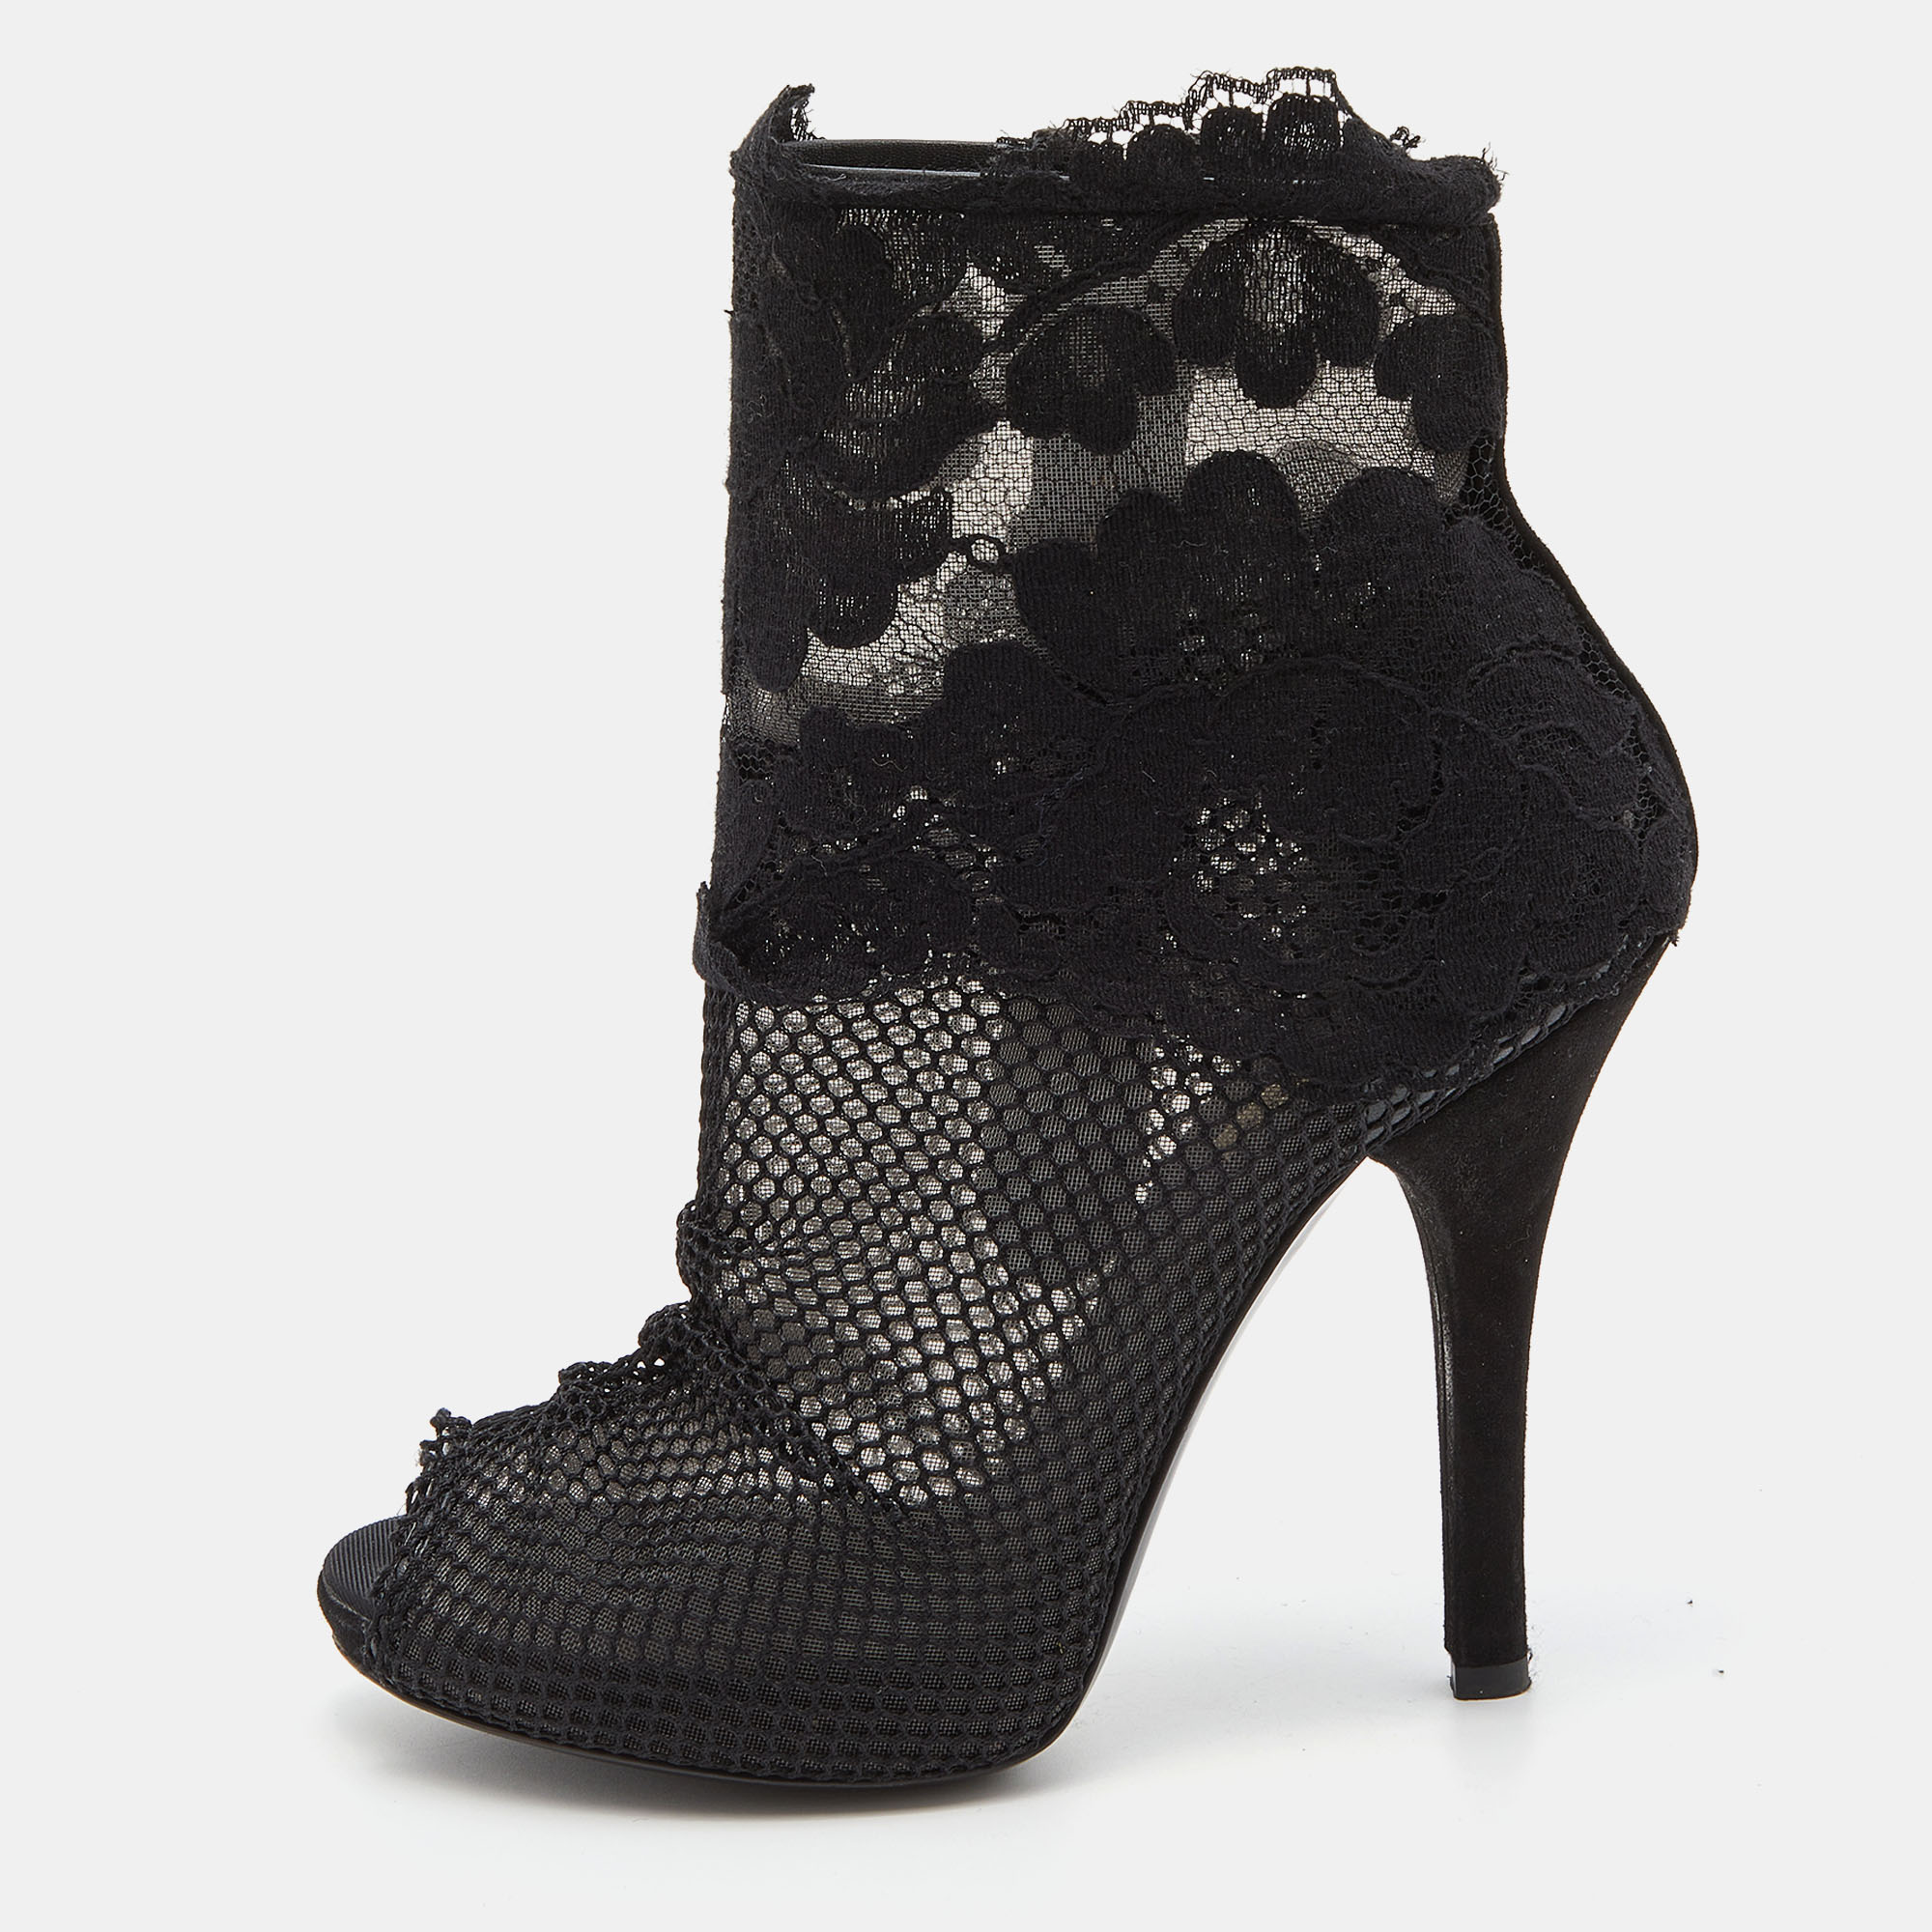 Pre-owned Dolce & Gabbana Black Lace And Mesh Peep Toe Booties Size 37.5